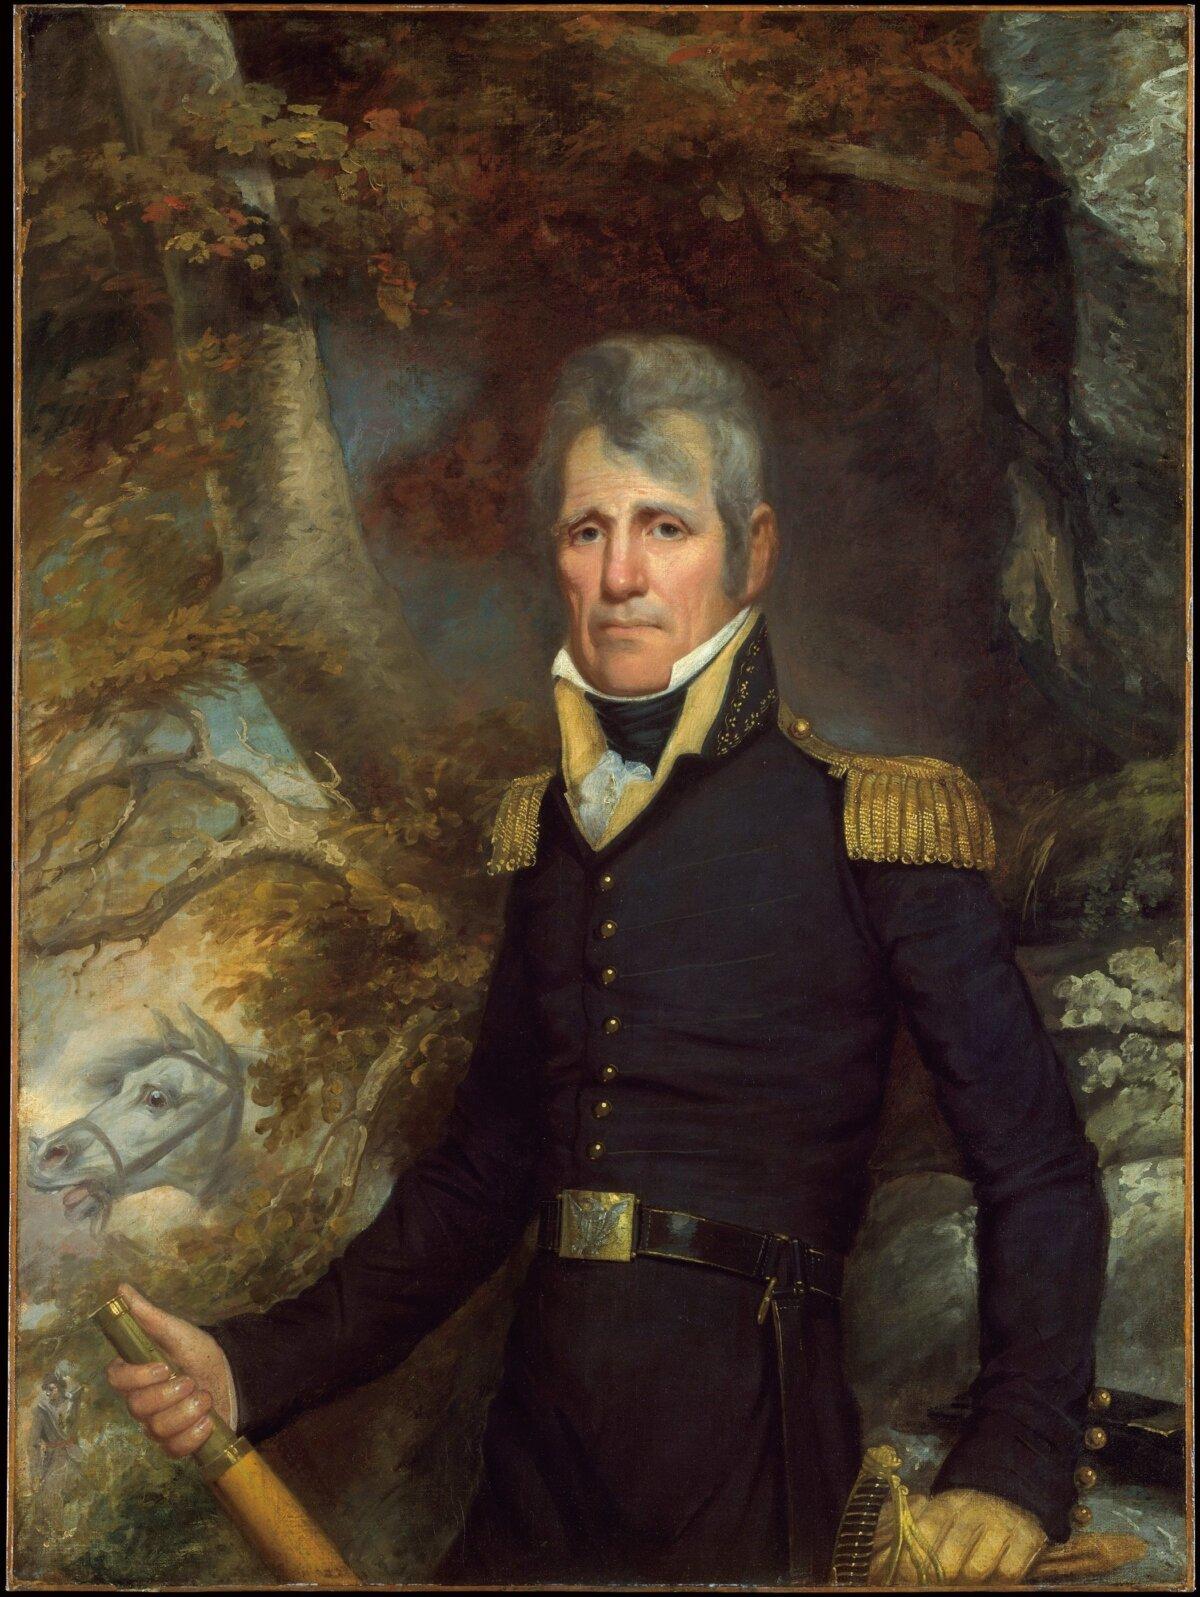 Andrew Jackson’s triumphal military portrait in which he was celebrated as the hero of the War of 1812. “General Andrew Jackson” by John Wesley Jarvis, circa 1819. Oil on canvas. The Metropolitan Museum of Art, New York. (Public Domain)